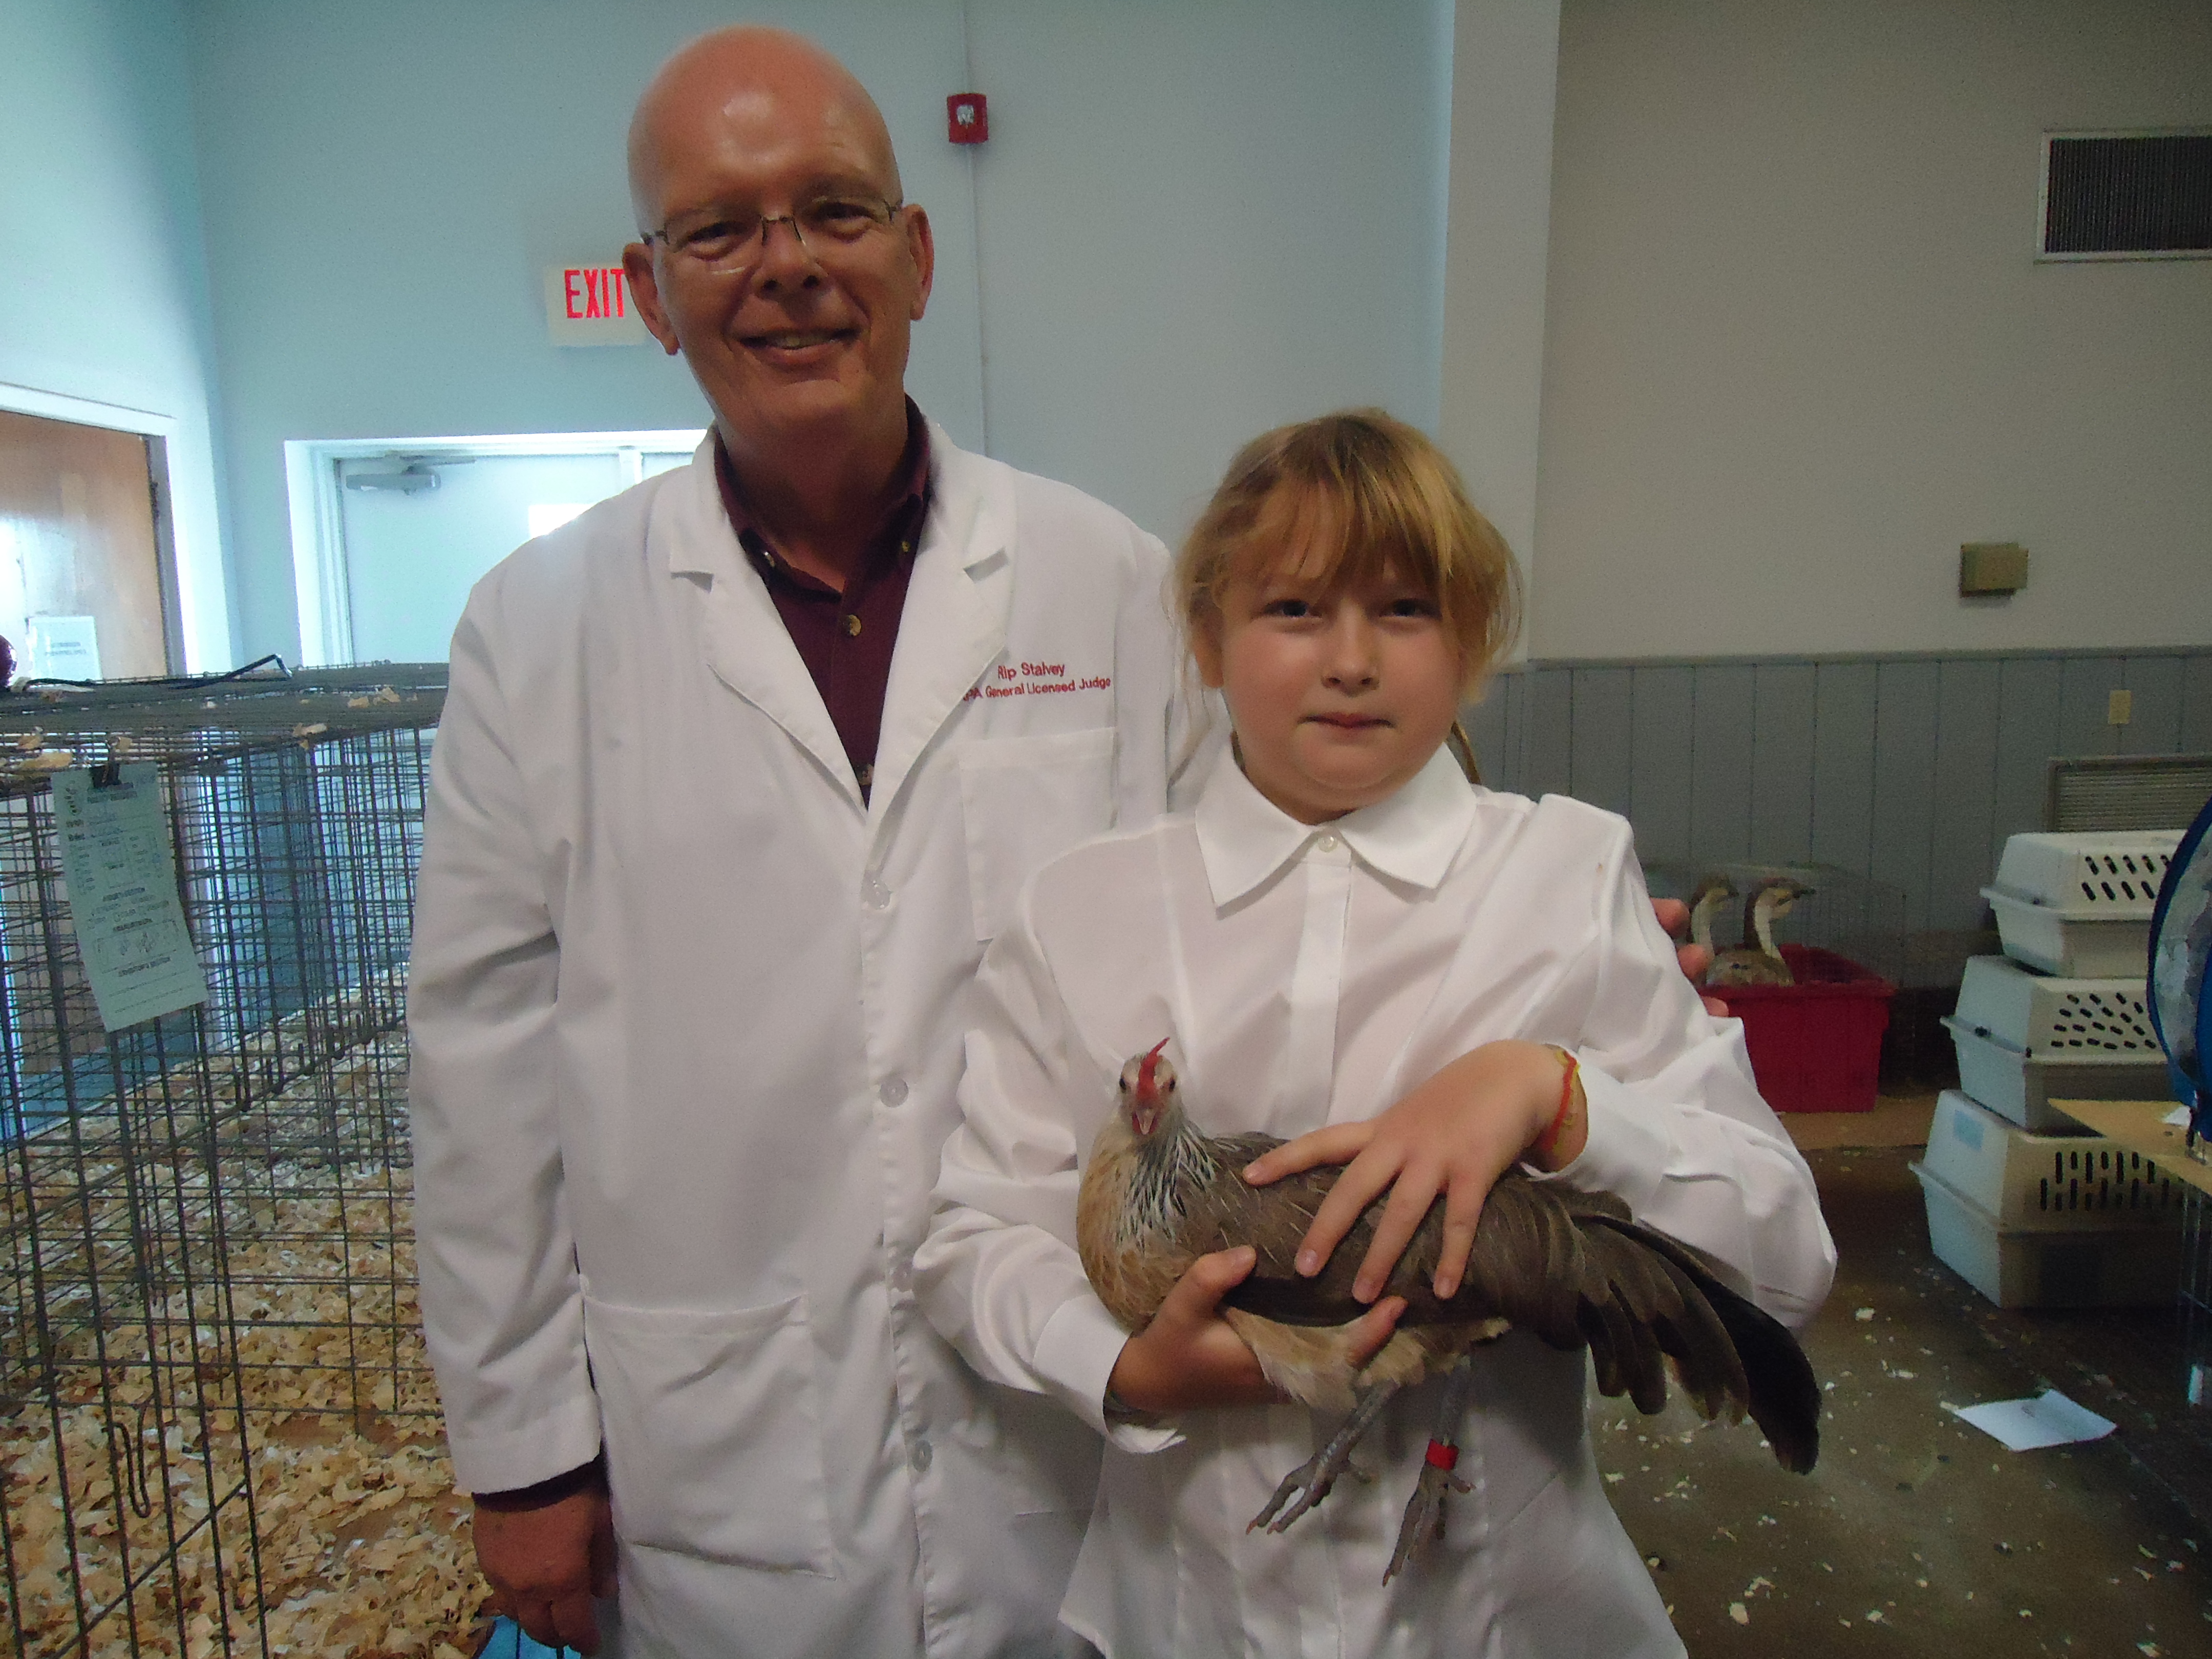 2011 Inverness, Florida show.My daughter, Kaycee and judge Rip.
Her standard phoenix pullet won BB,BV ,Class and Champion LF.